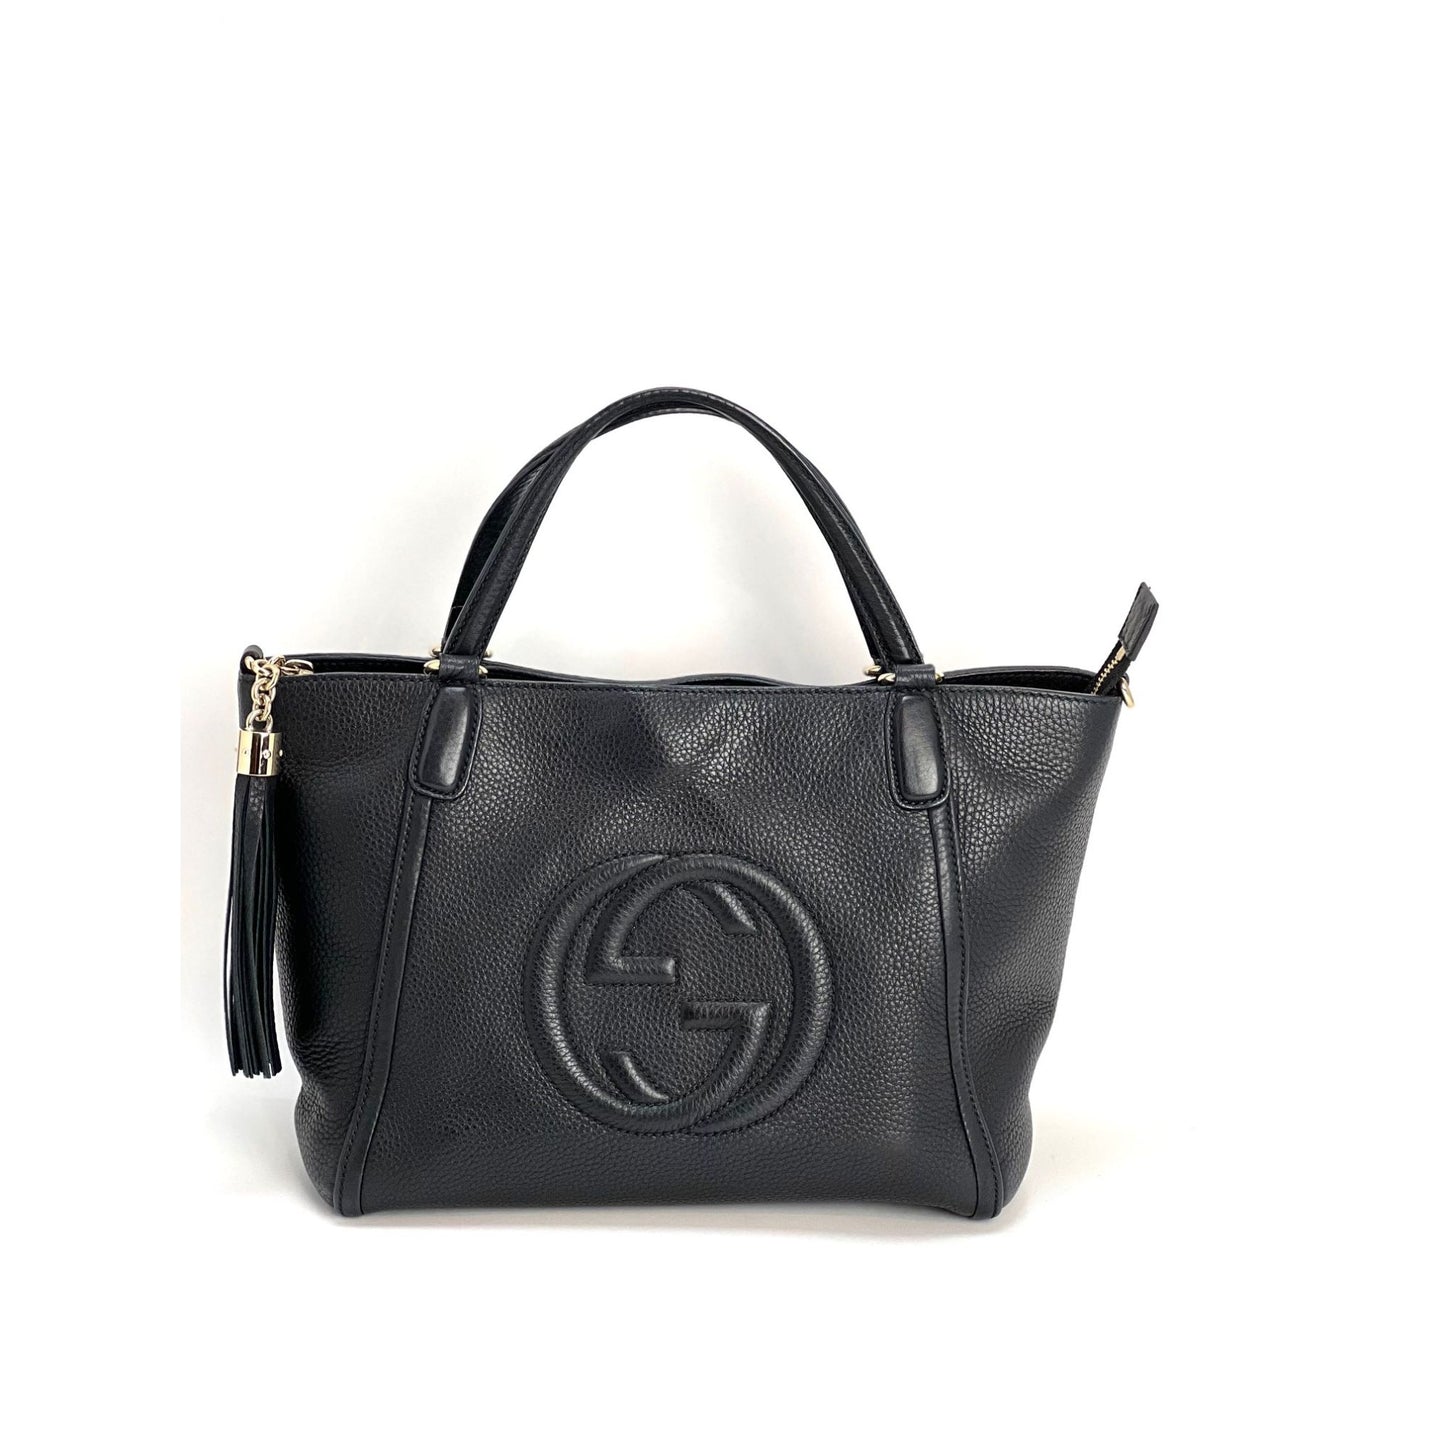 Gucci - Authenticated Interlocking Handbag - Leather Black for Women, Very Good Condition